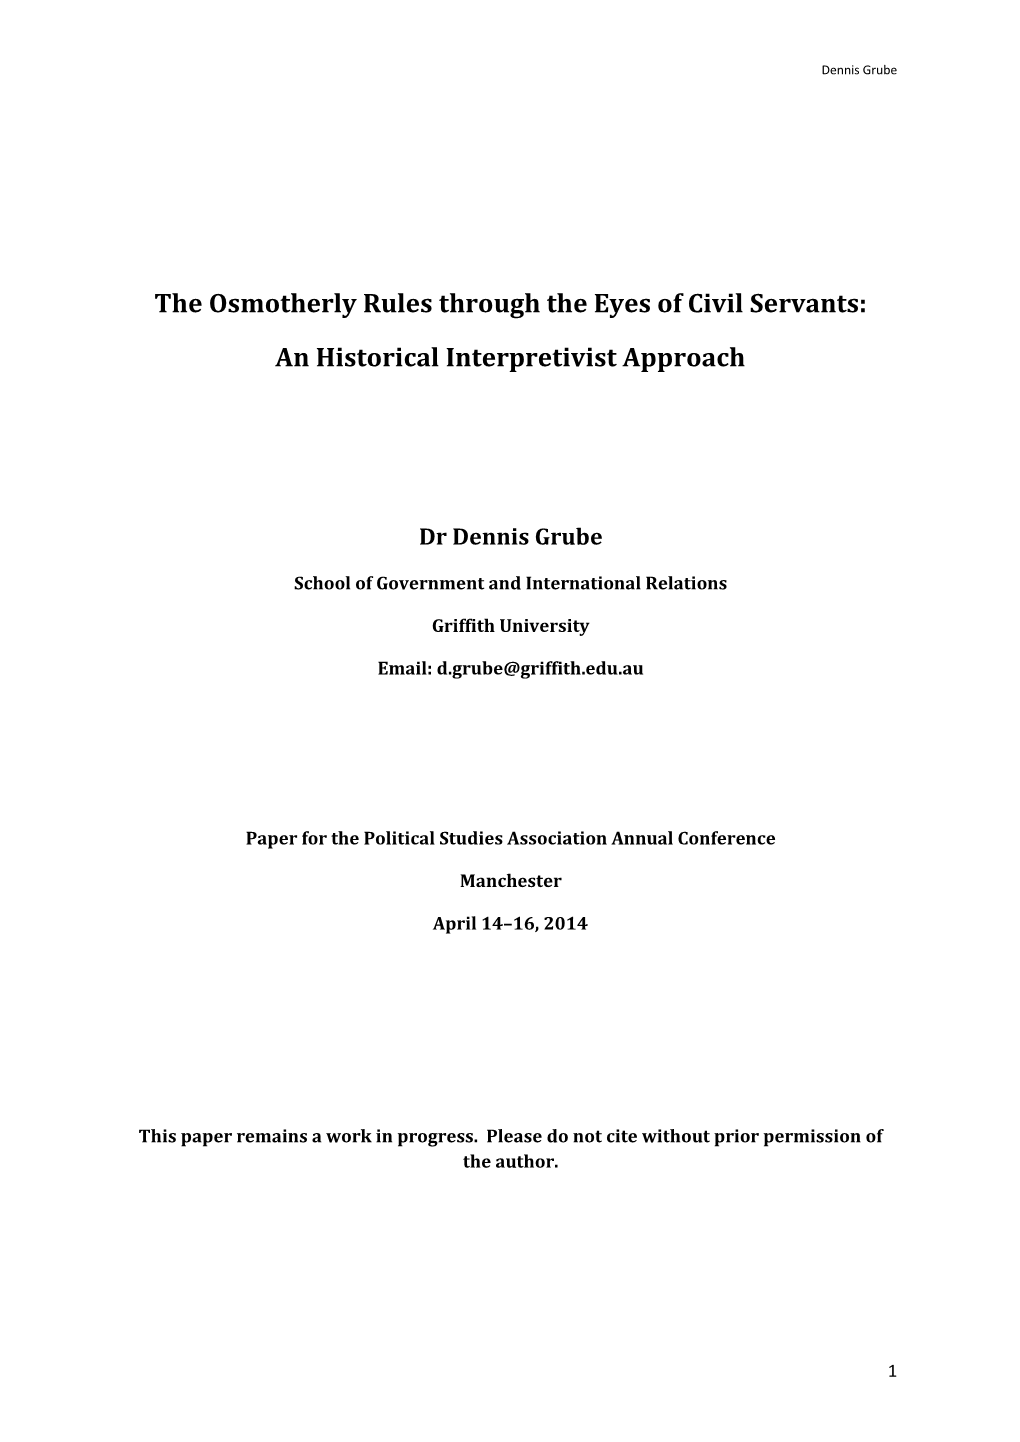 The Osmotherly Rules Through the Eyes of Civil Servants: an Historical Interpretivist Approach